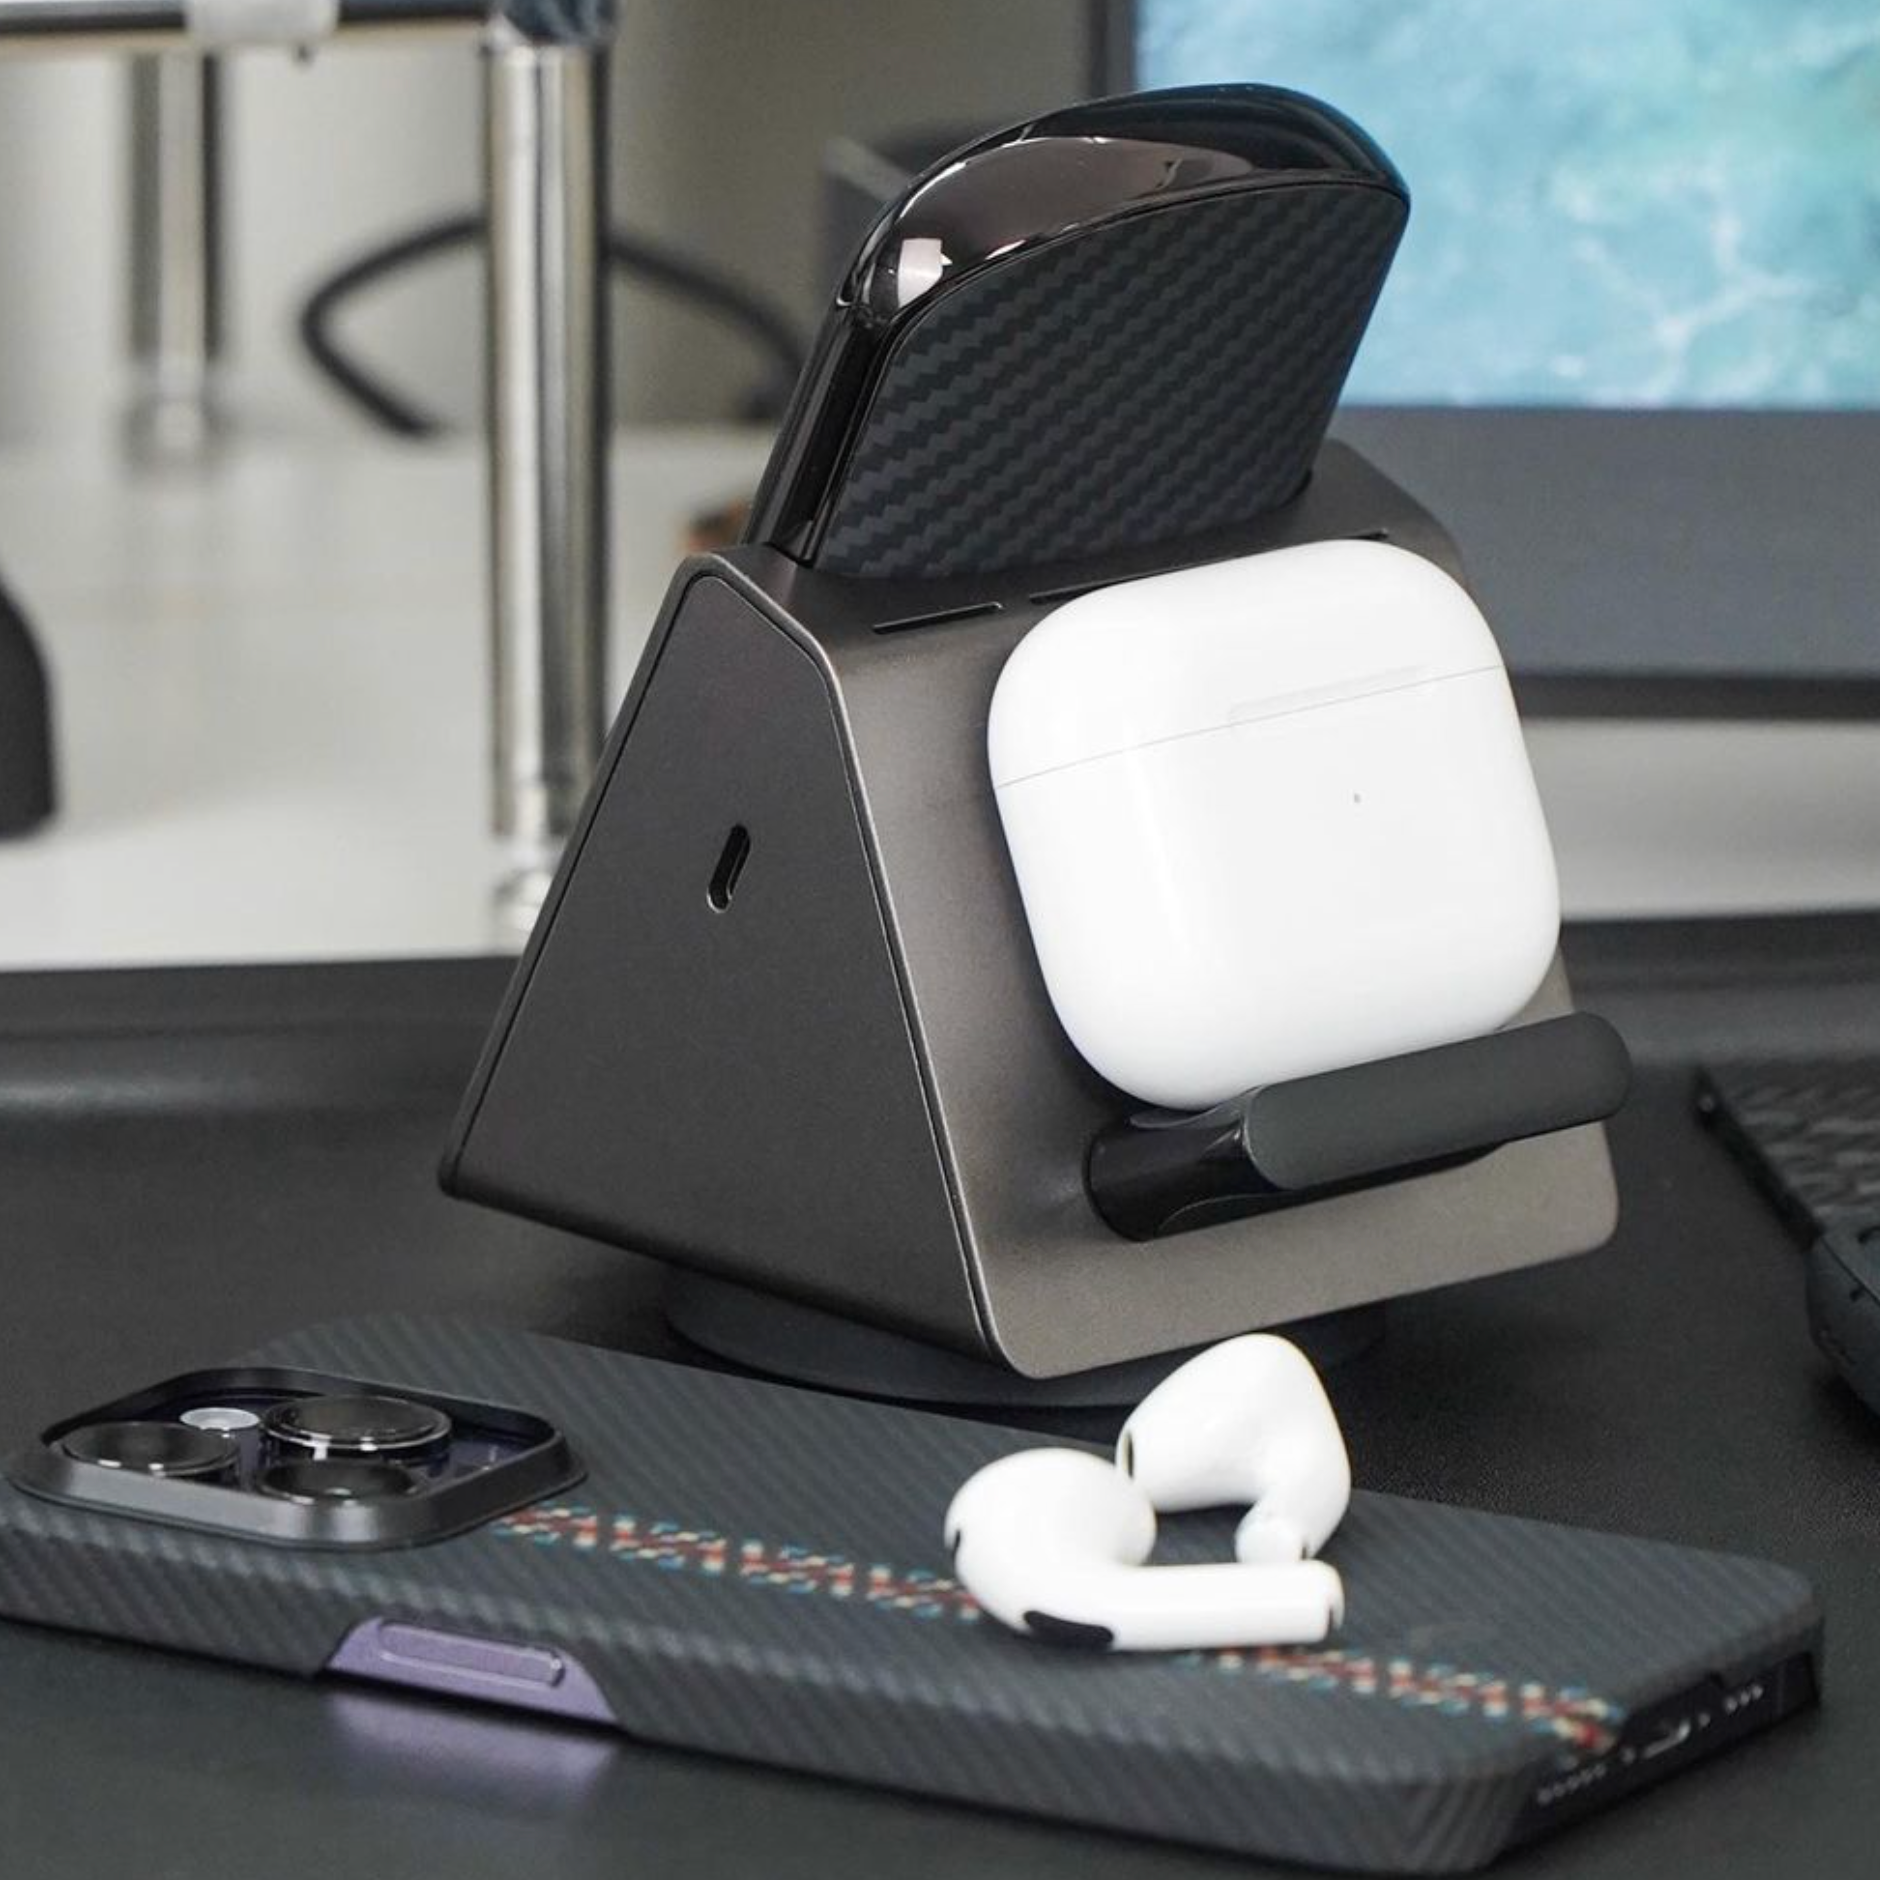 Pitaka's Charging Station for iphone and apple airpods